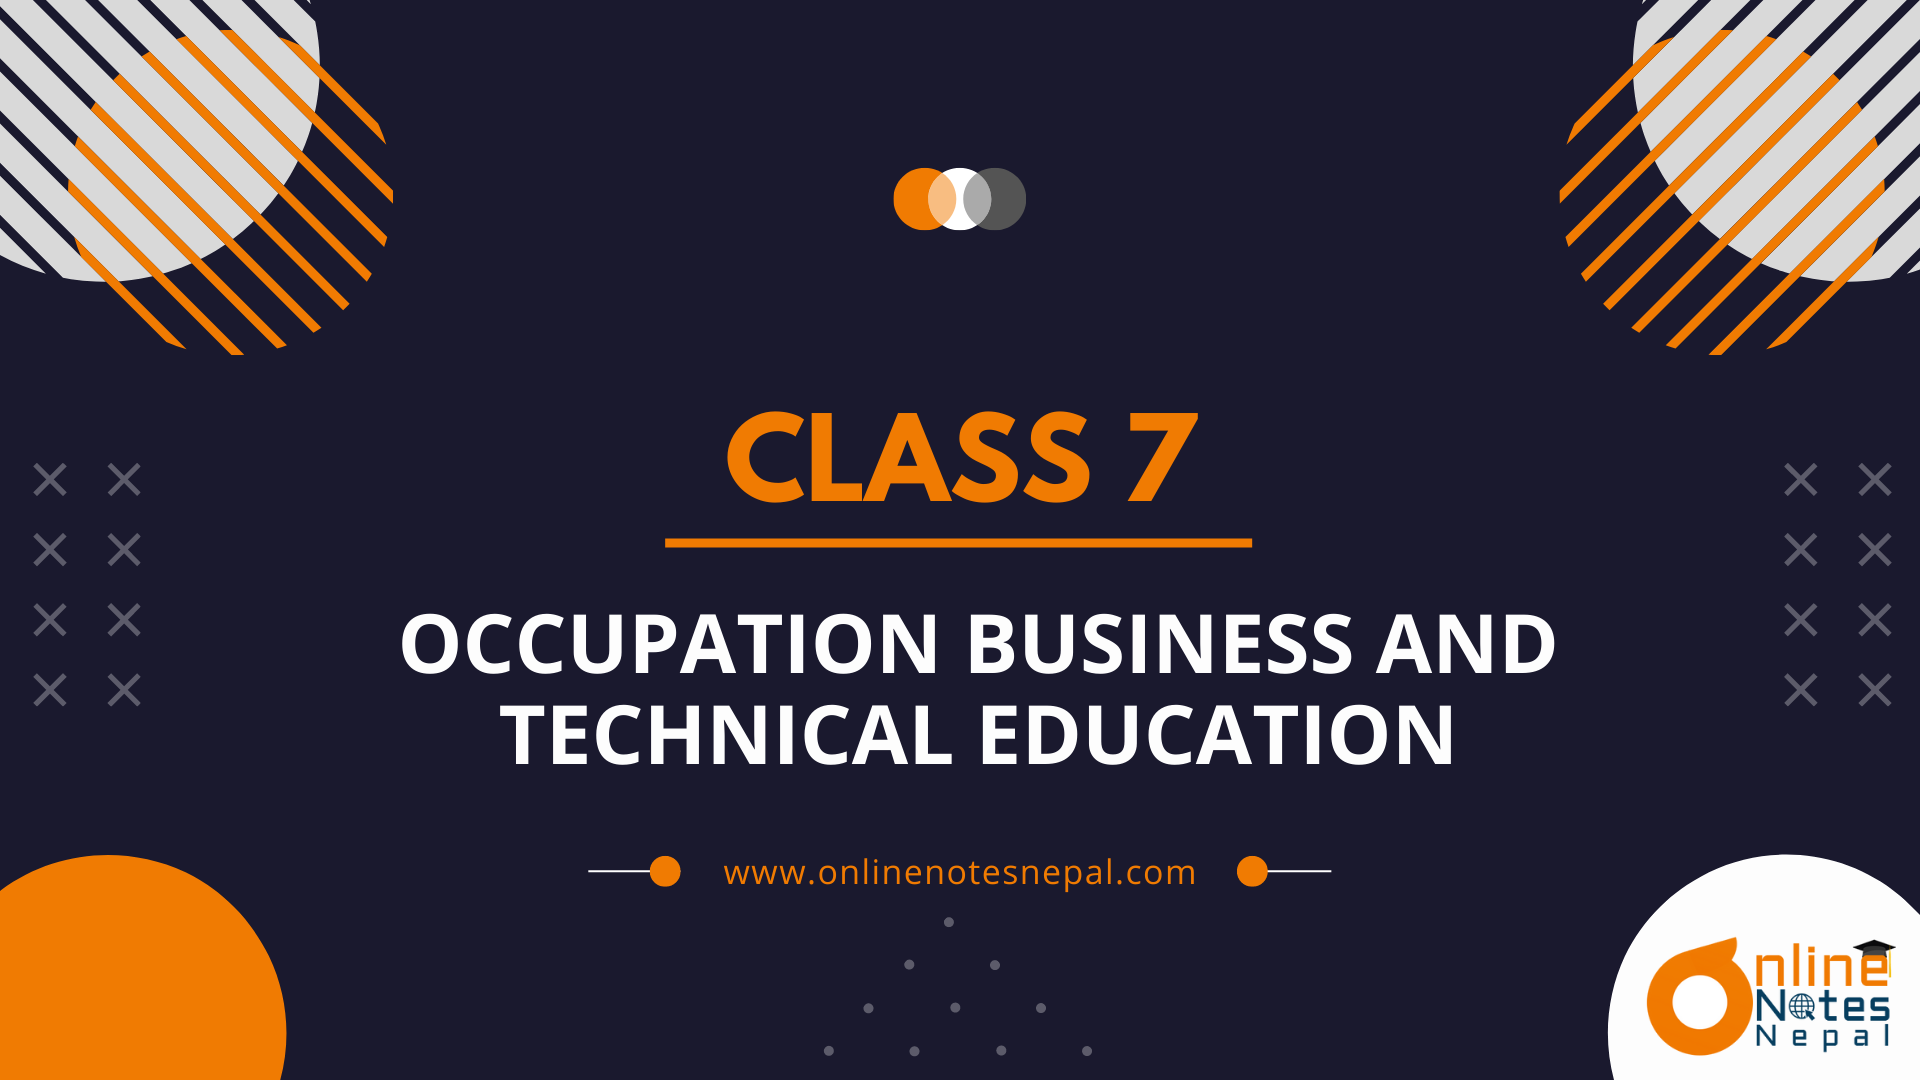 Occupation Business and Technical Education in Grade-7, Reference Note